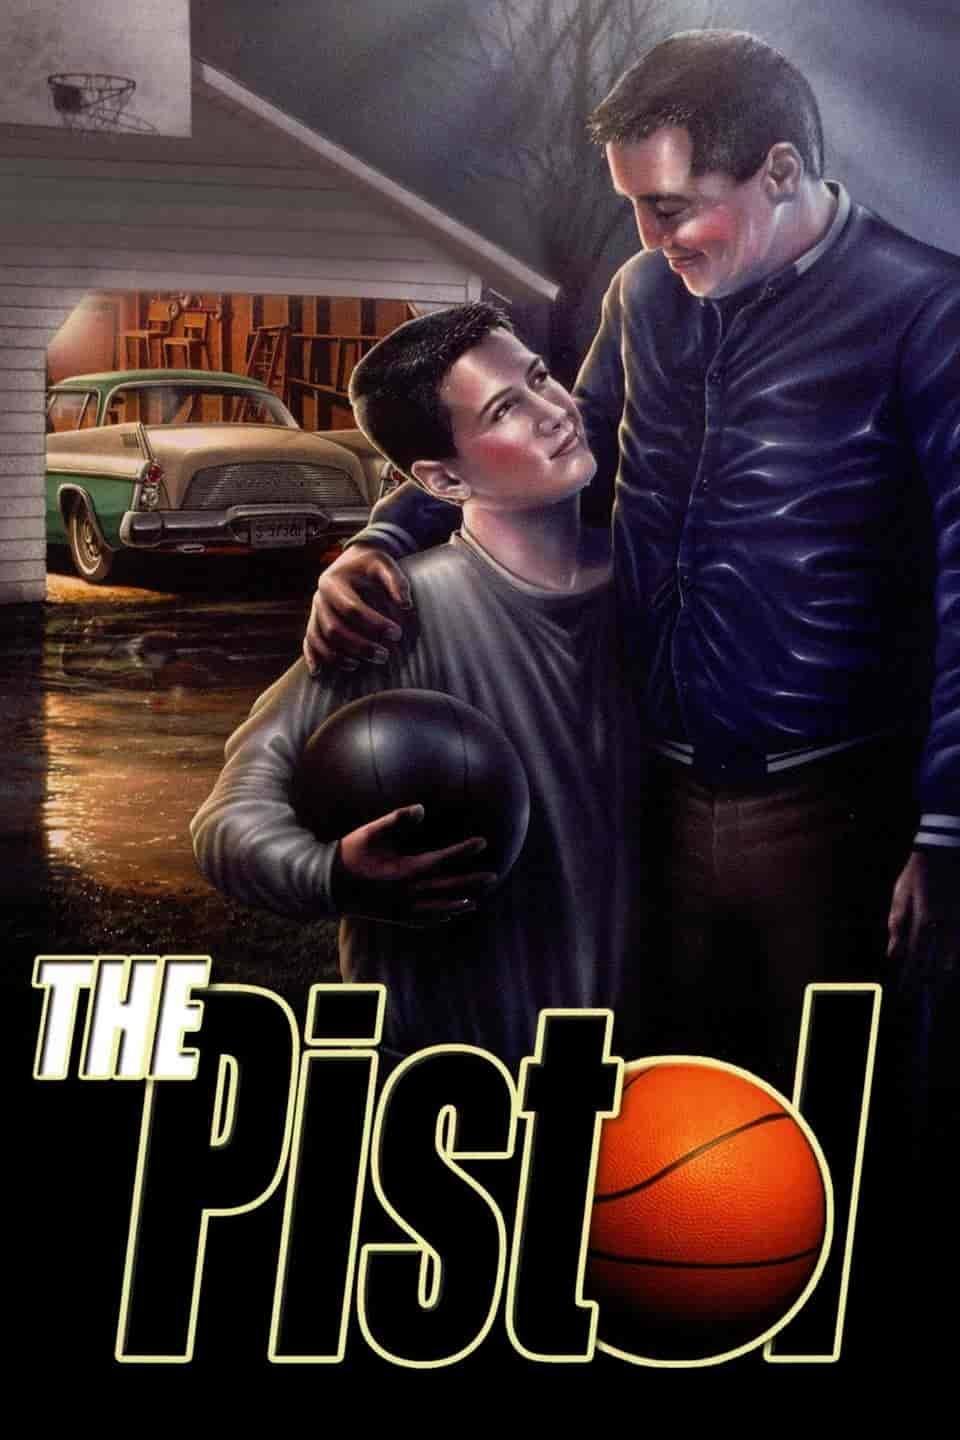 The Pistol - The Birth of a Legend (1991) Movie Poster